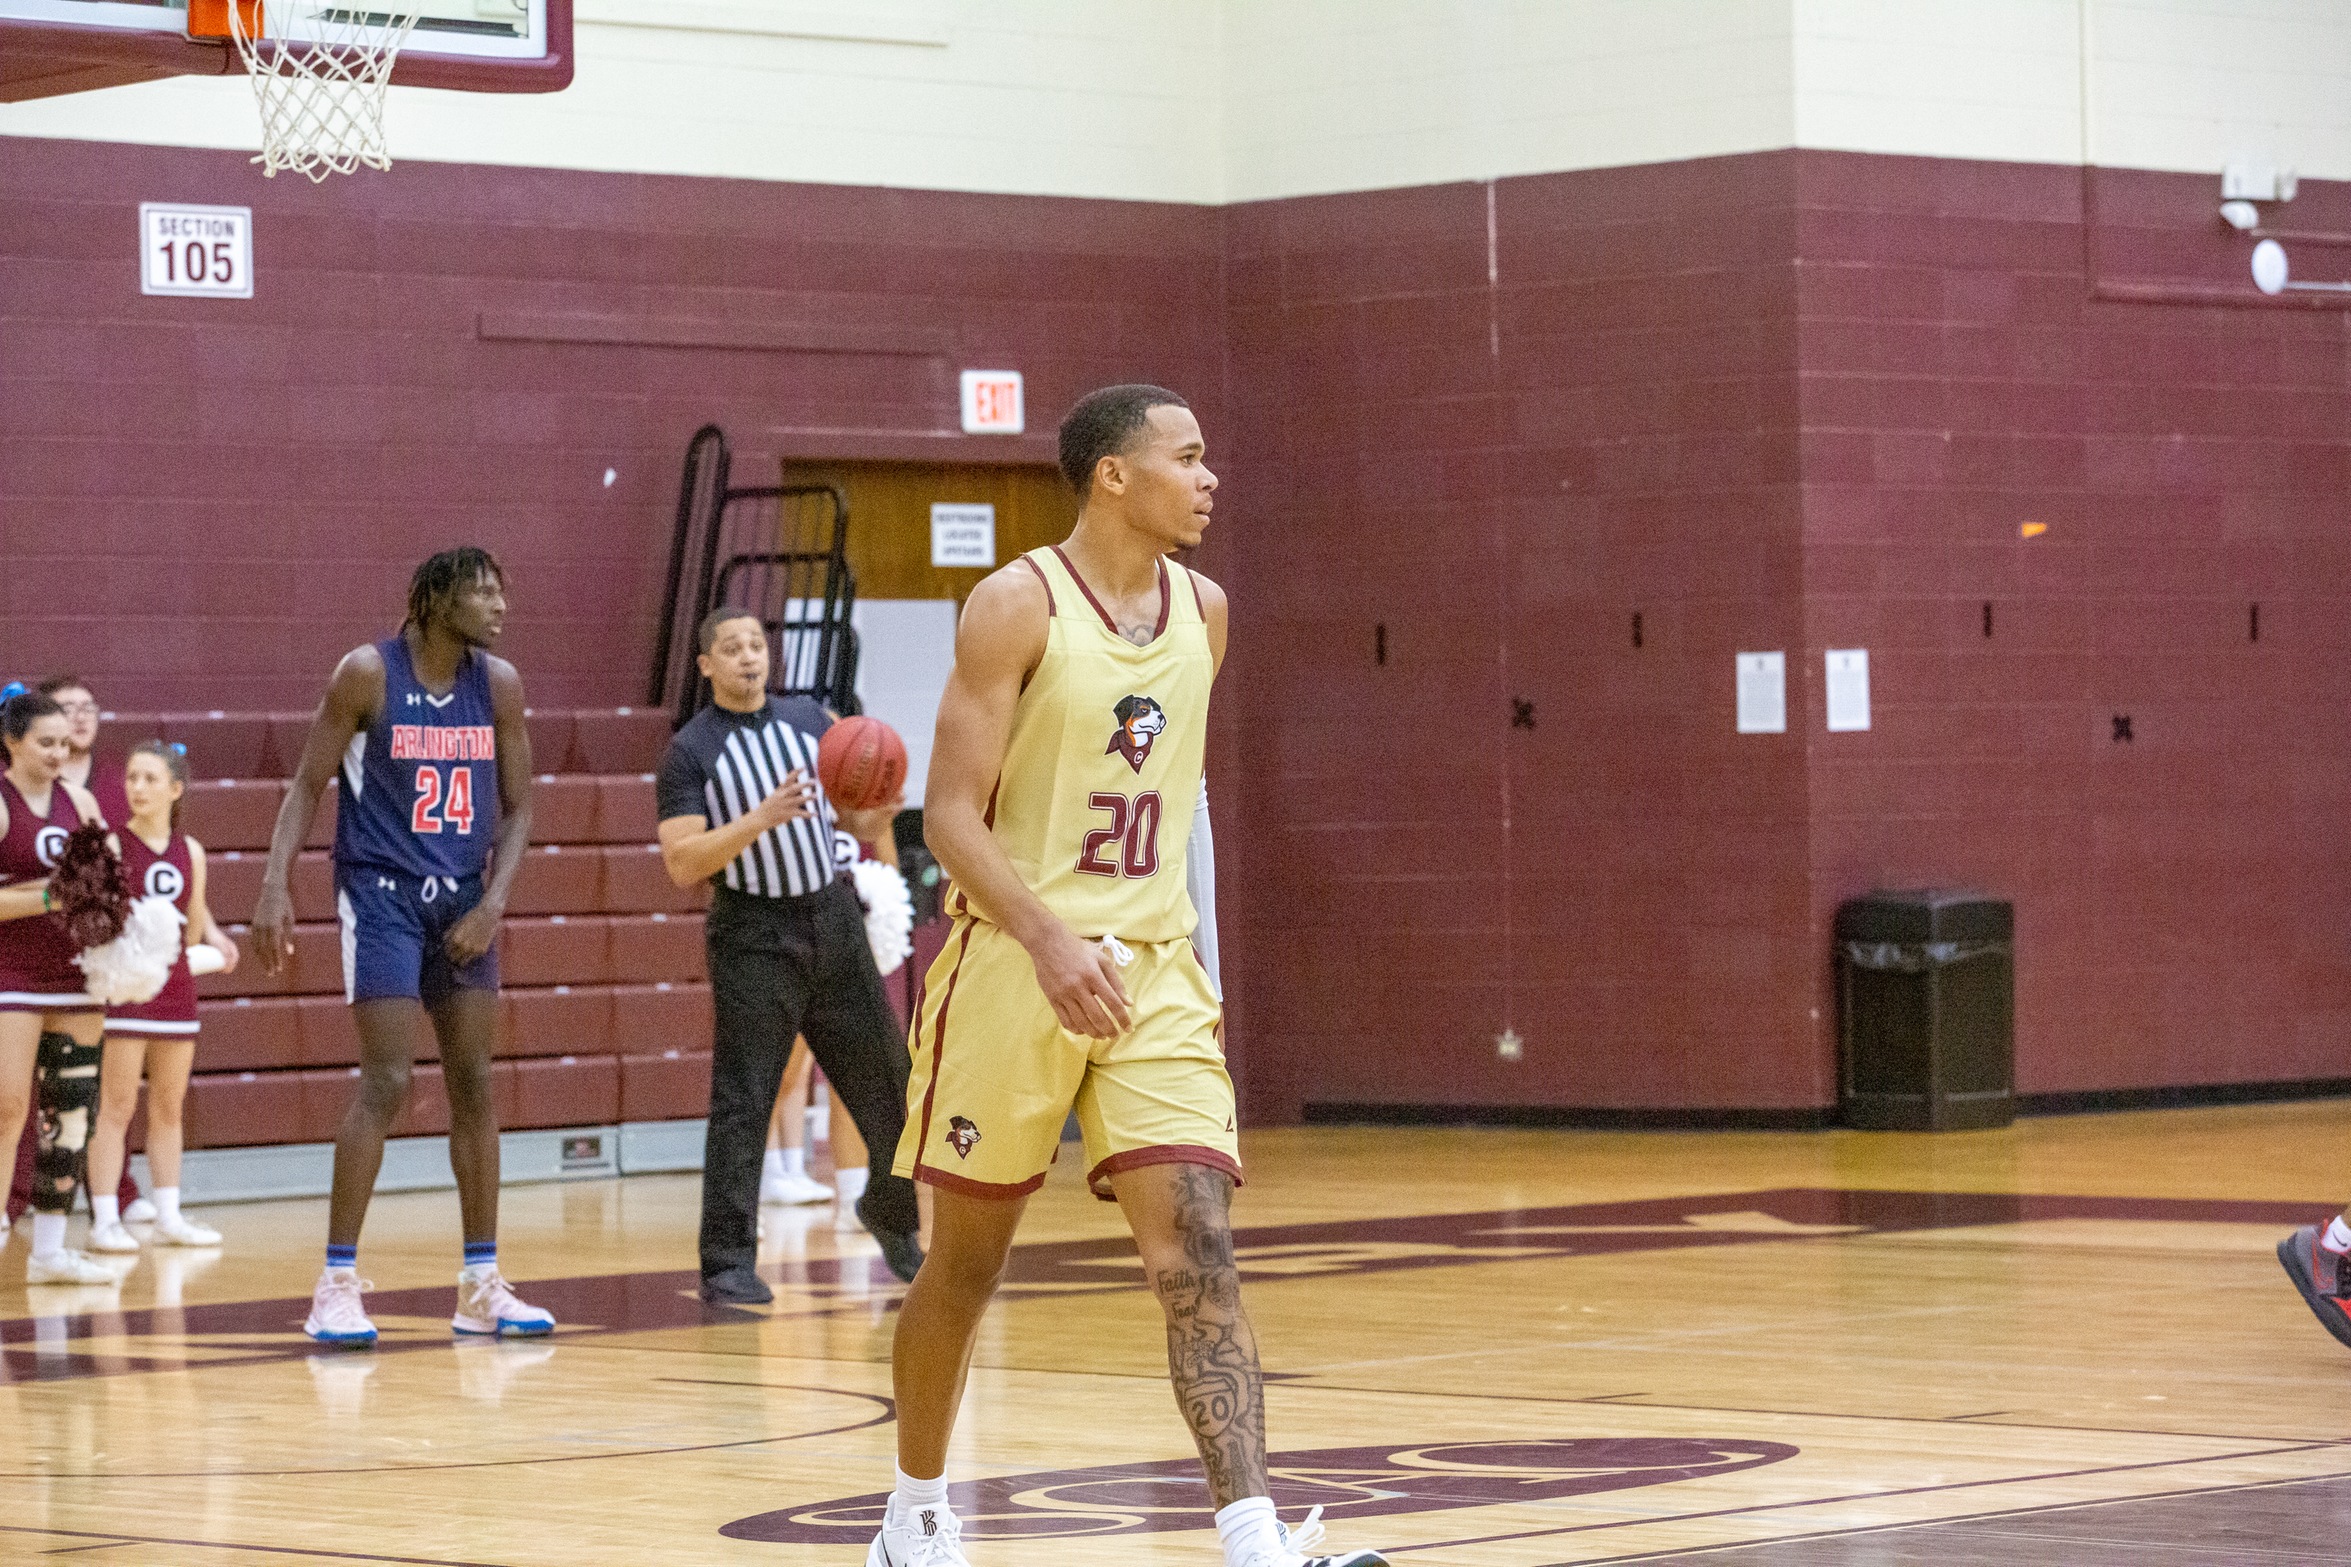 Gents Fall At Home To Schreiner On Sunday, 90-74